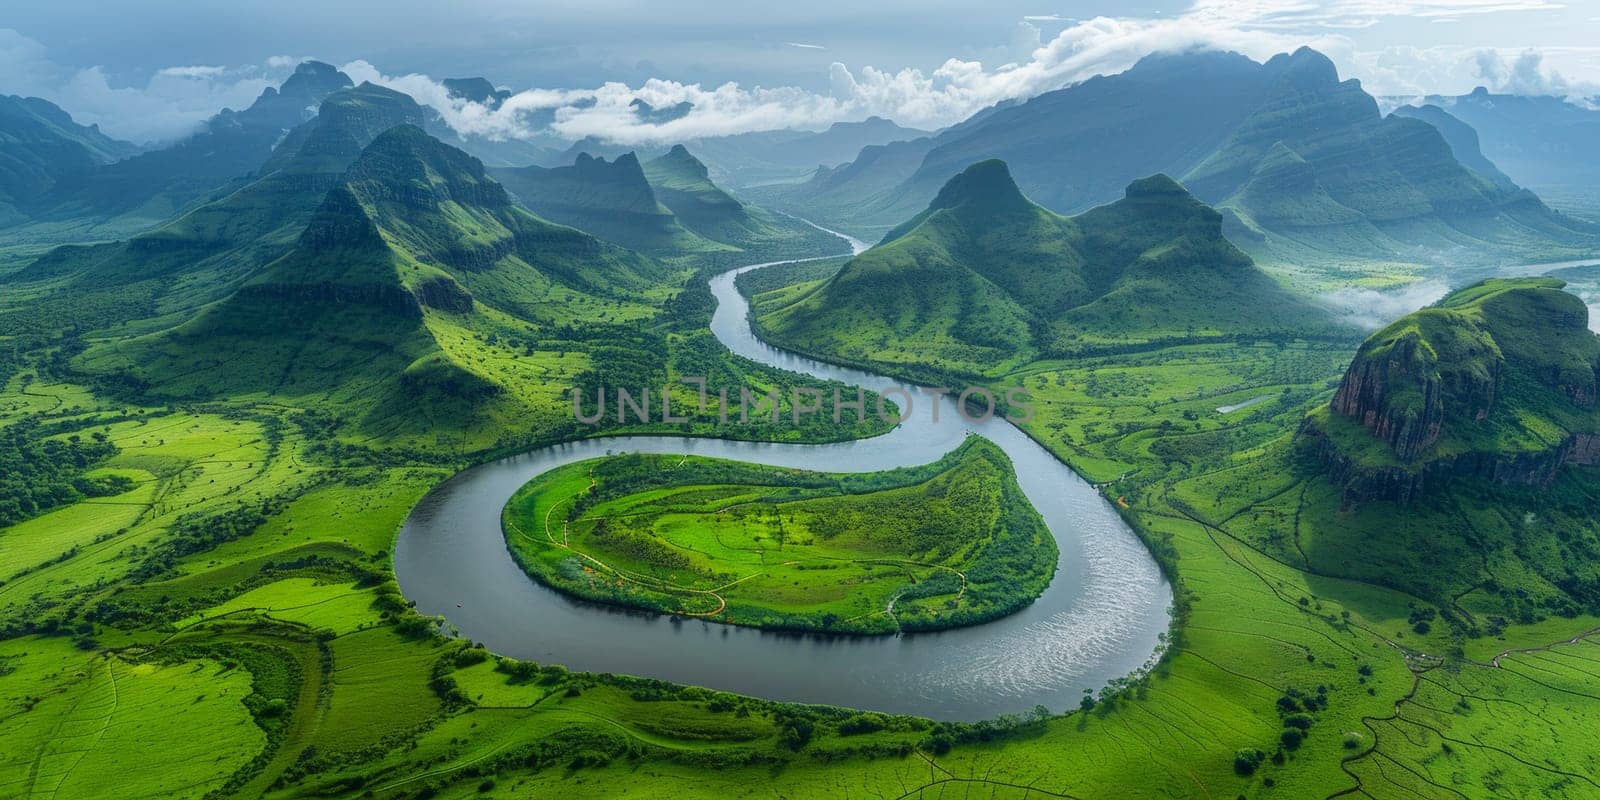 A tranquil river meandering through a vibrant green valley, surrounded by lush foliage and rolling hills under a clear blue sky.